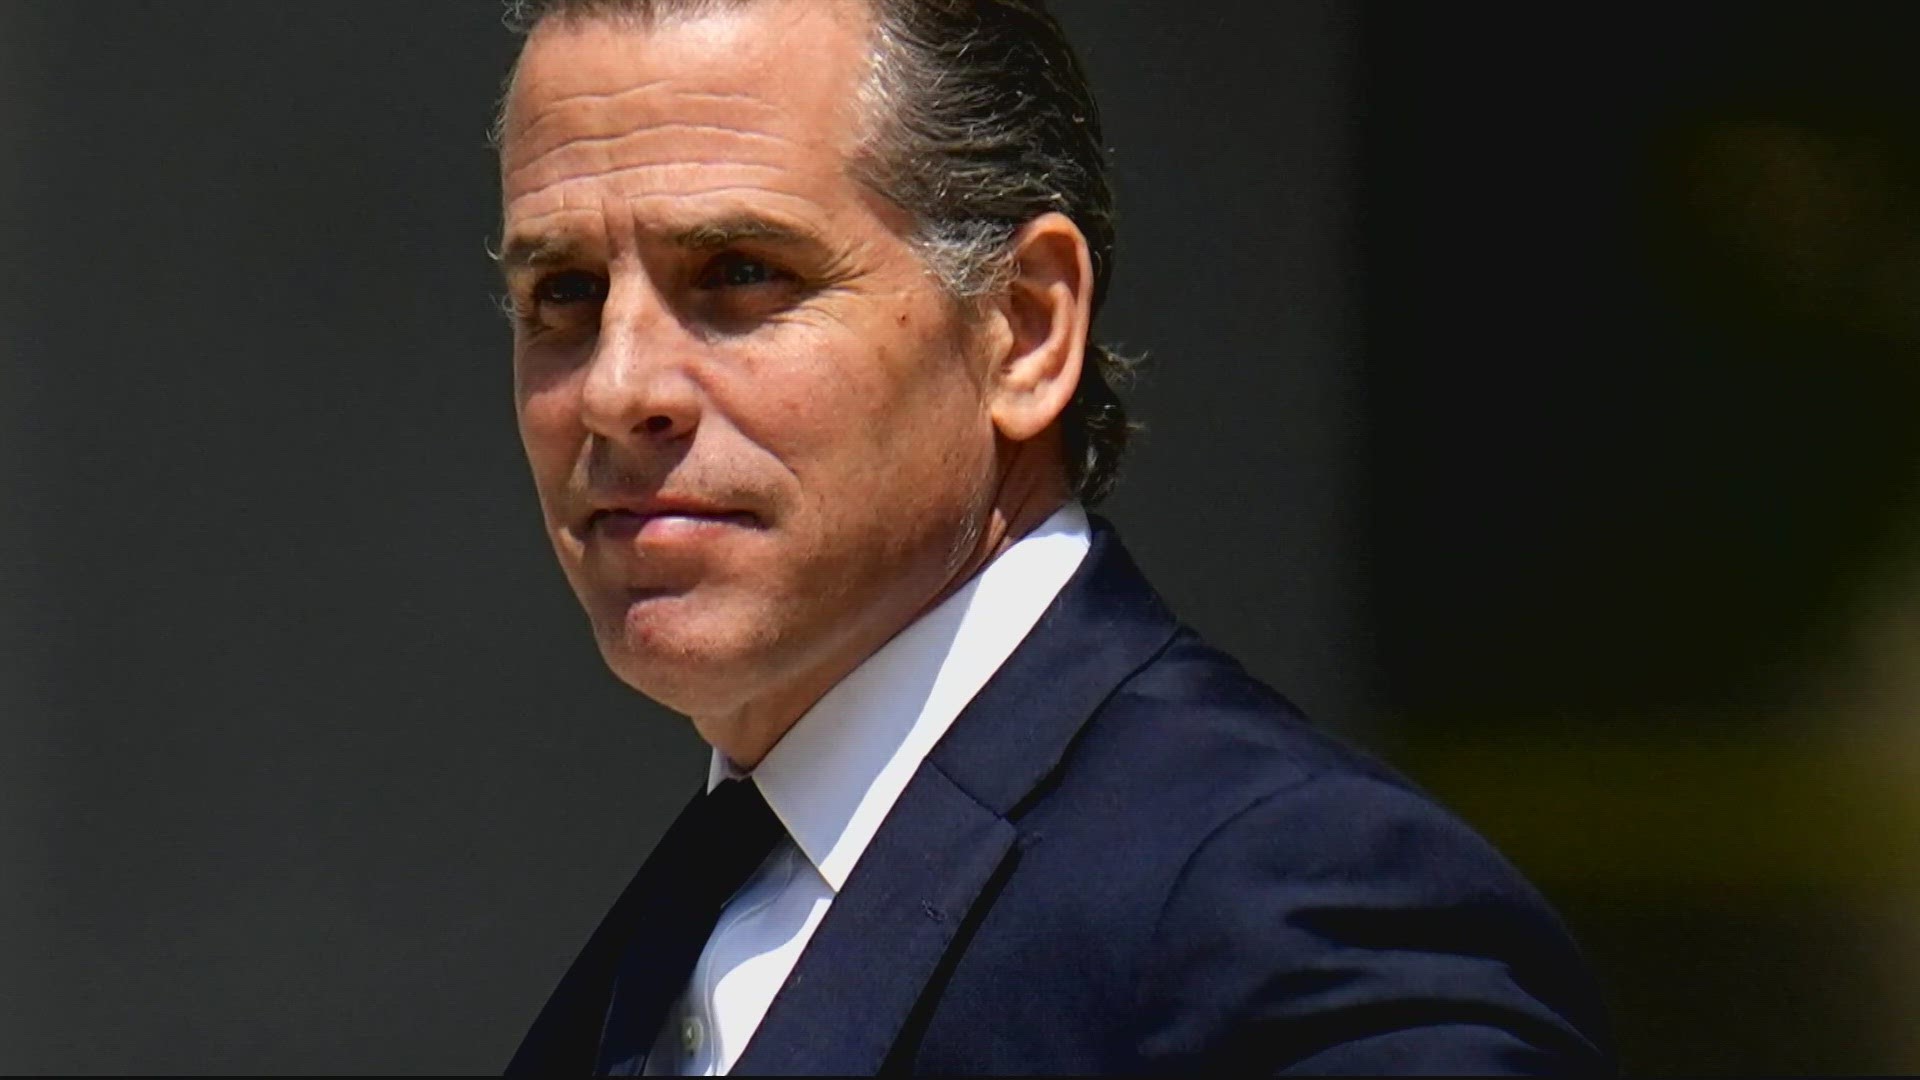 Hunter Biden is accused of lying about drug use when he bought a firearm in Oct. 2018, a period when he has acknowledged struggling with addiction to crack cocaine.